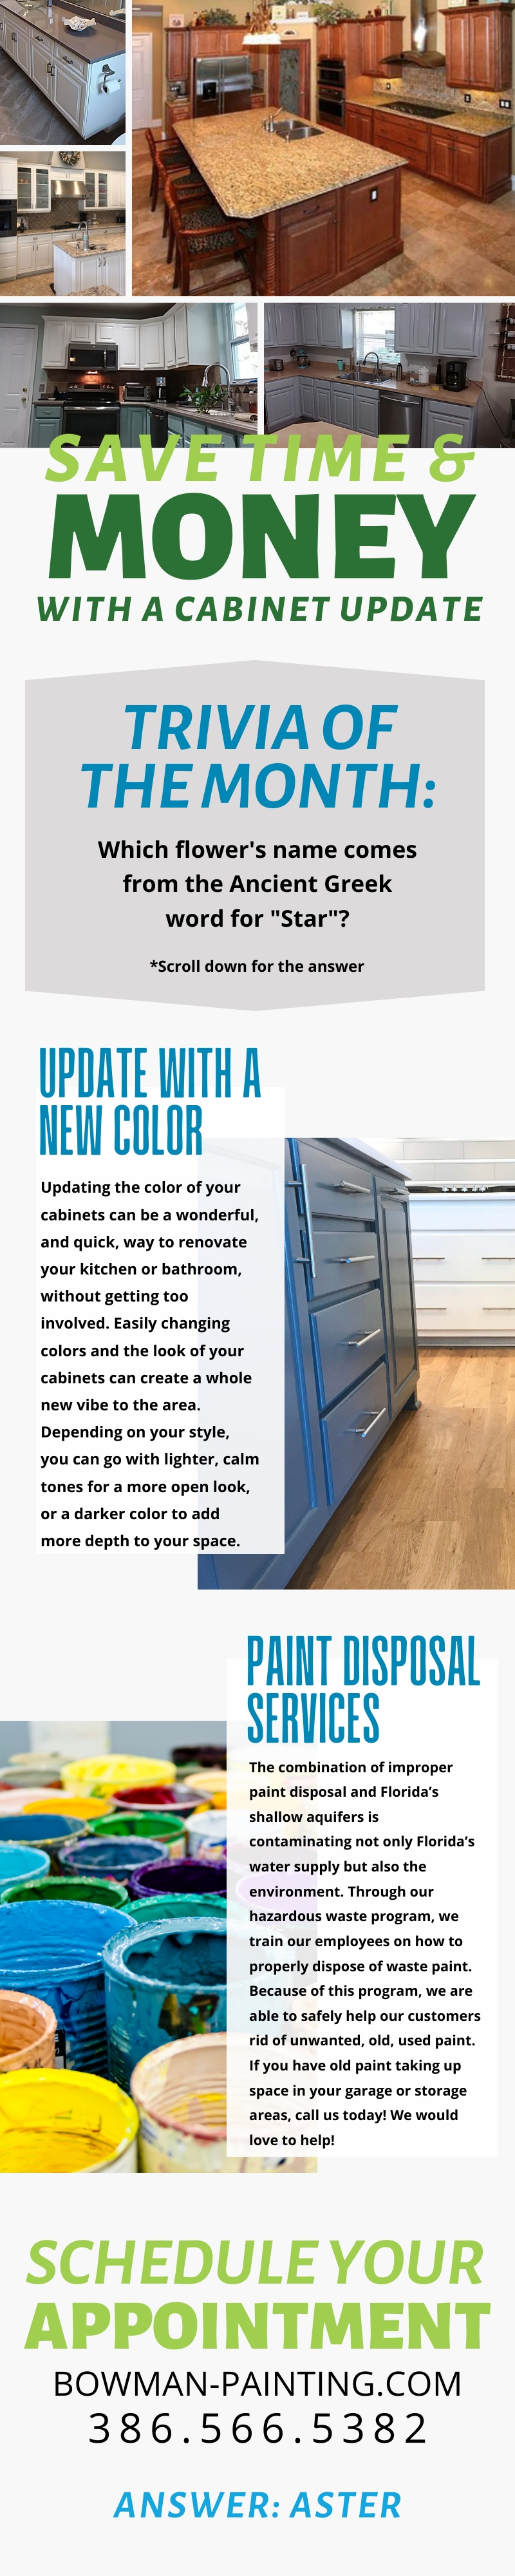 Save Time & Money with a Cabinet Update! 1